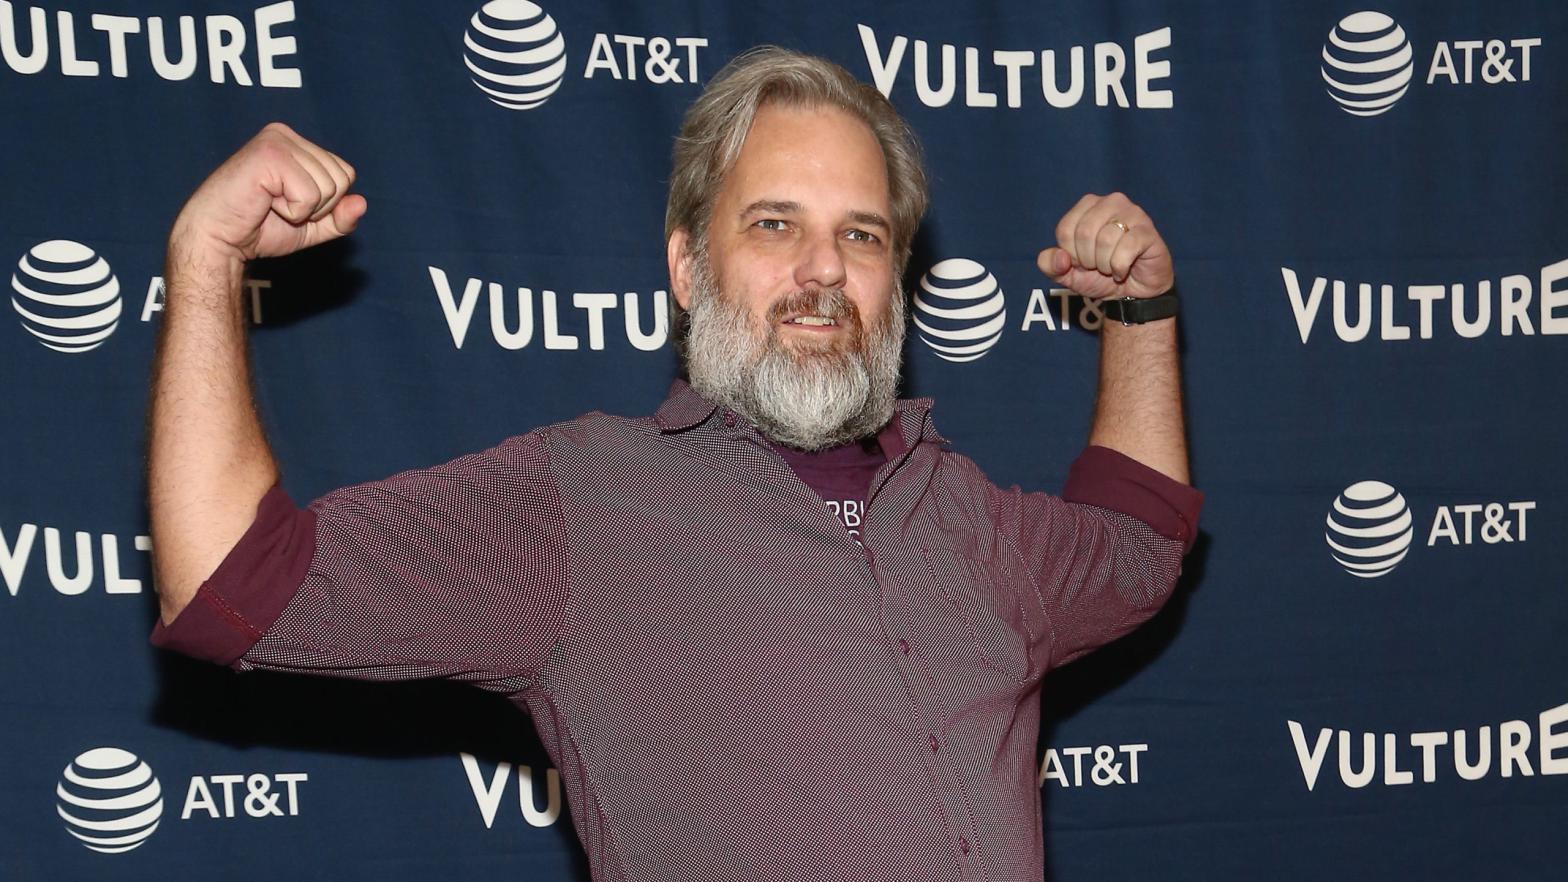 Dan Harmon attends the Vulture Festival on November 10, 2019 in Hollywood, California. (Photo: ommaso Boddi/Getty Images for New York Magazine, Getty Images)